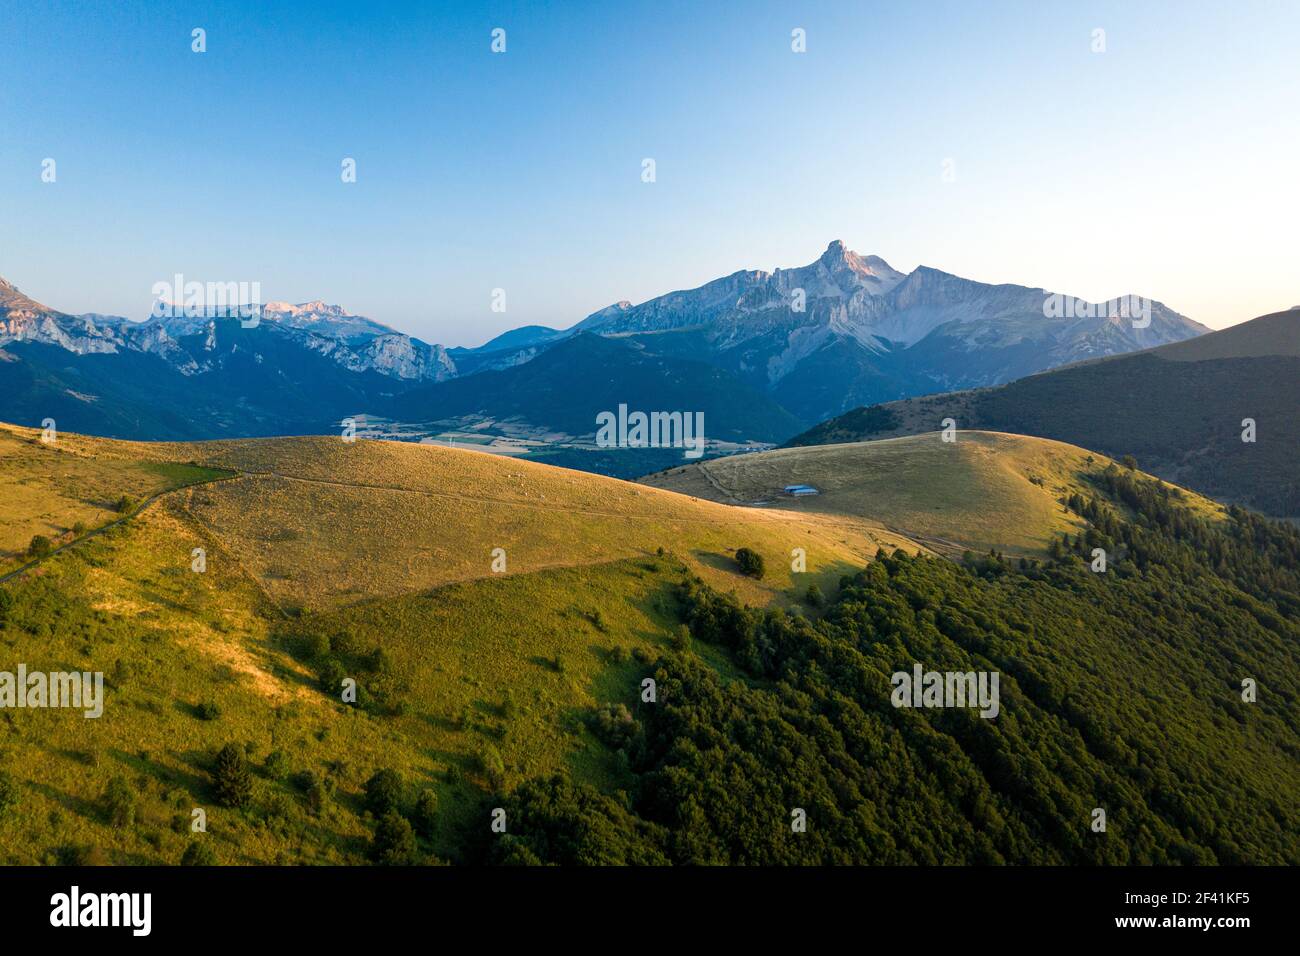 Stunning grassy hill in front of the mountain landscape Stock Photo